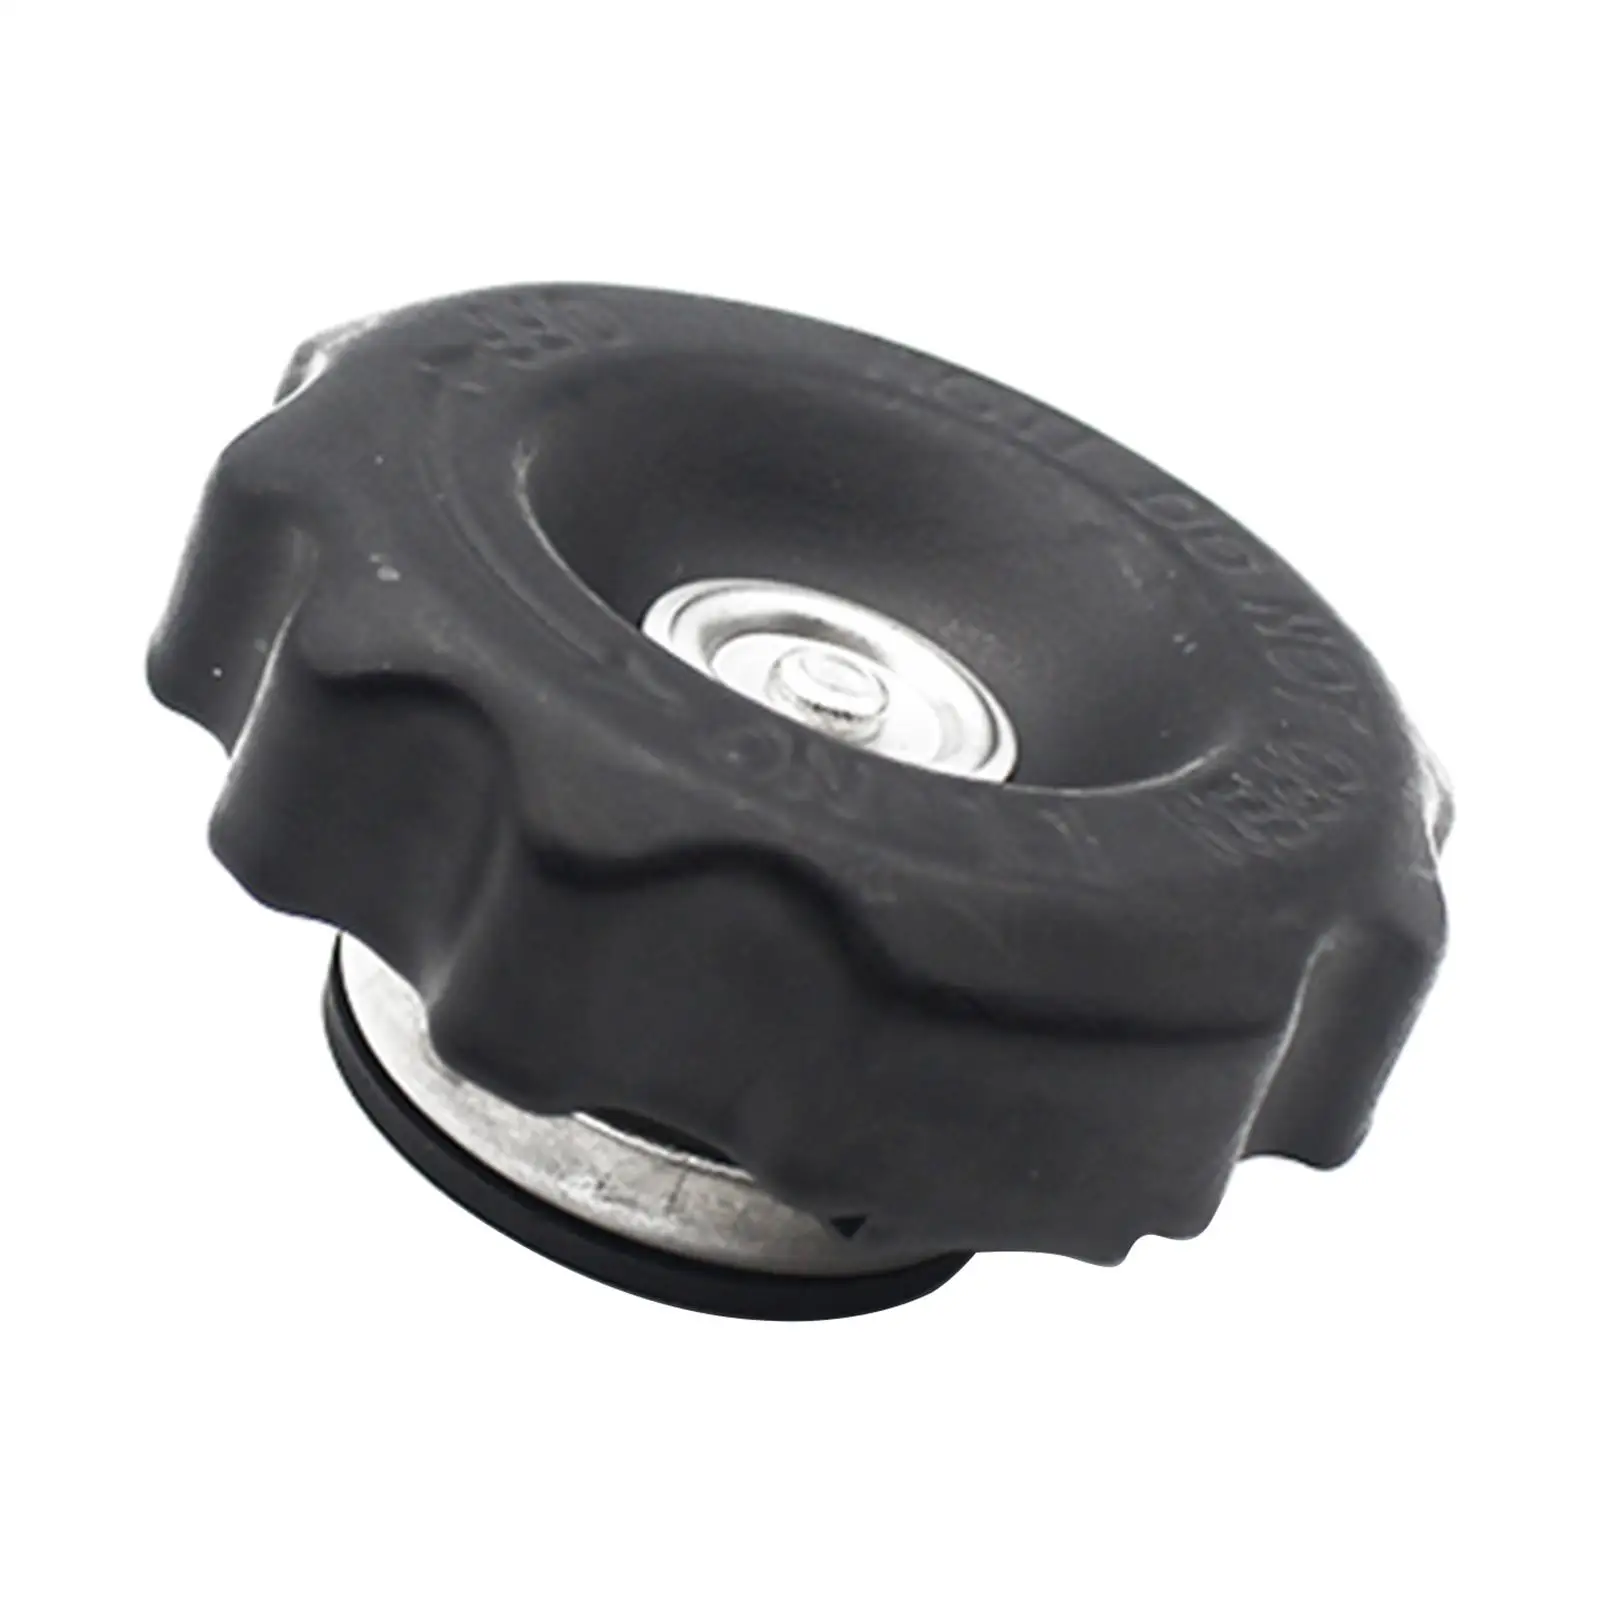 Motorbike Caps Cover Aluminum Black High Quality Accessories Universal Replacement Assemblies Motorcycle Part